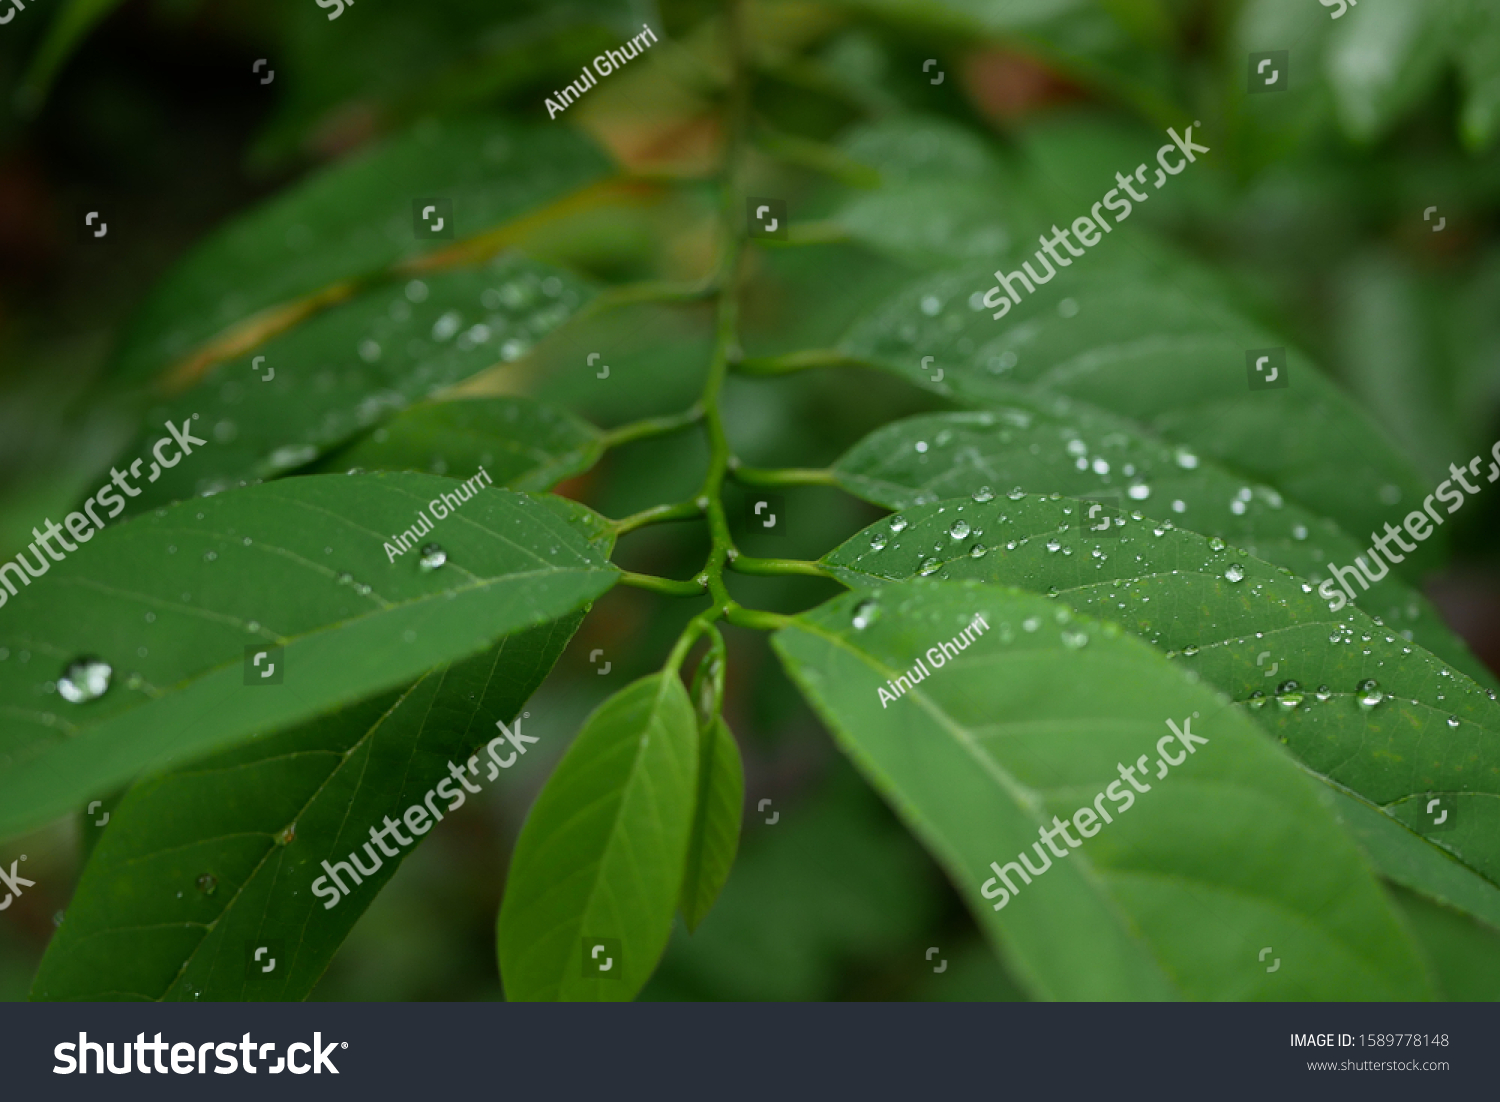 Some green leaves and water foam in the middle with a natural background #1589778148